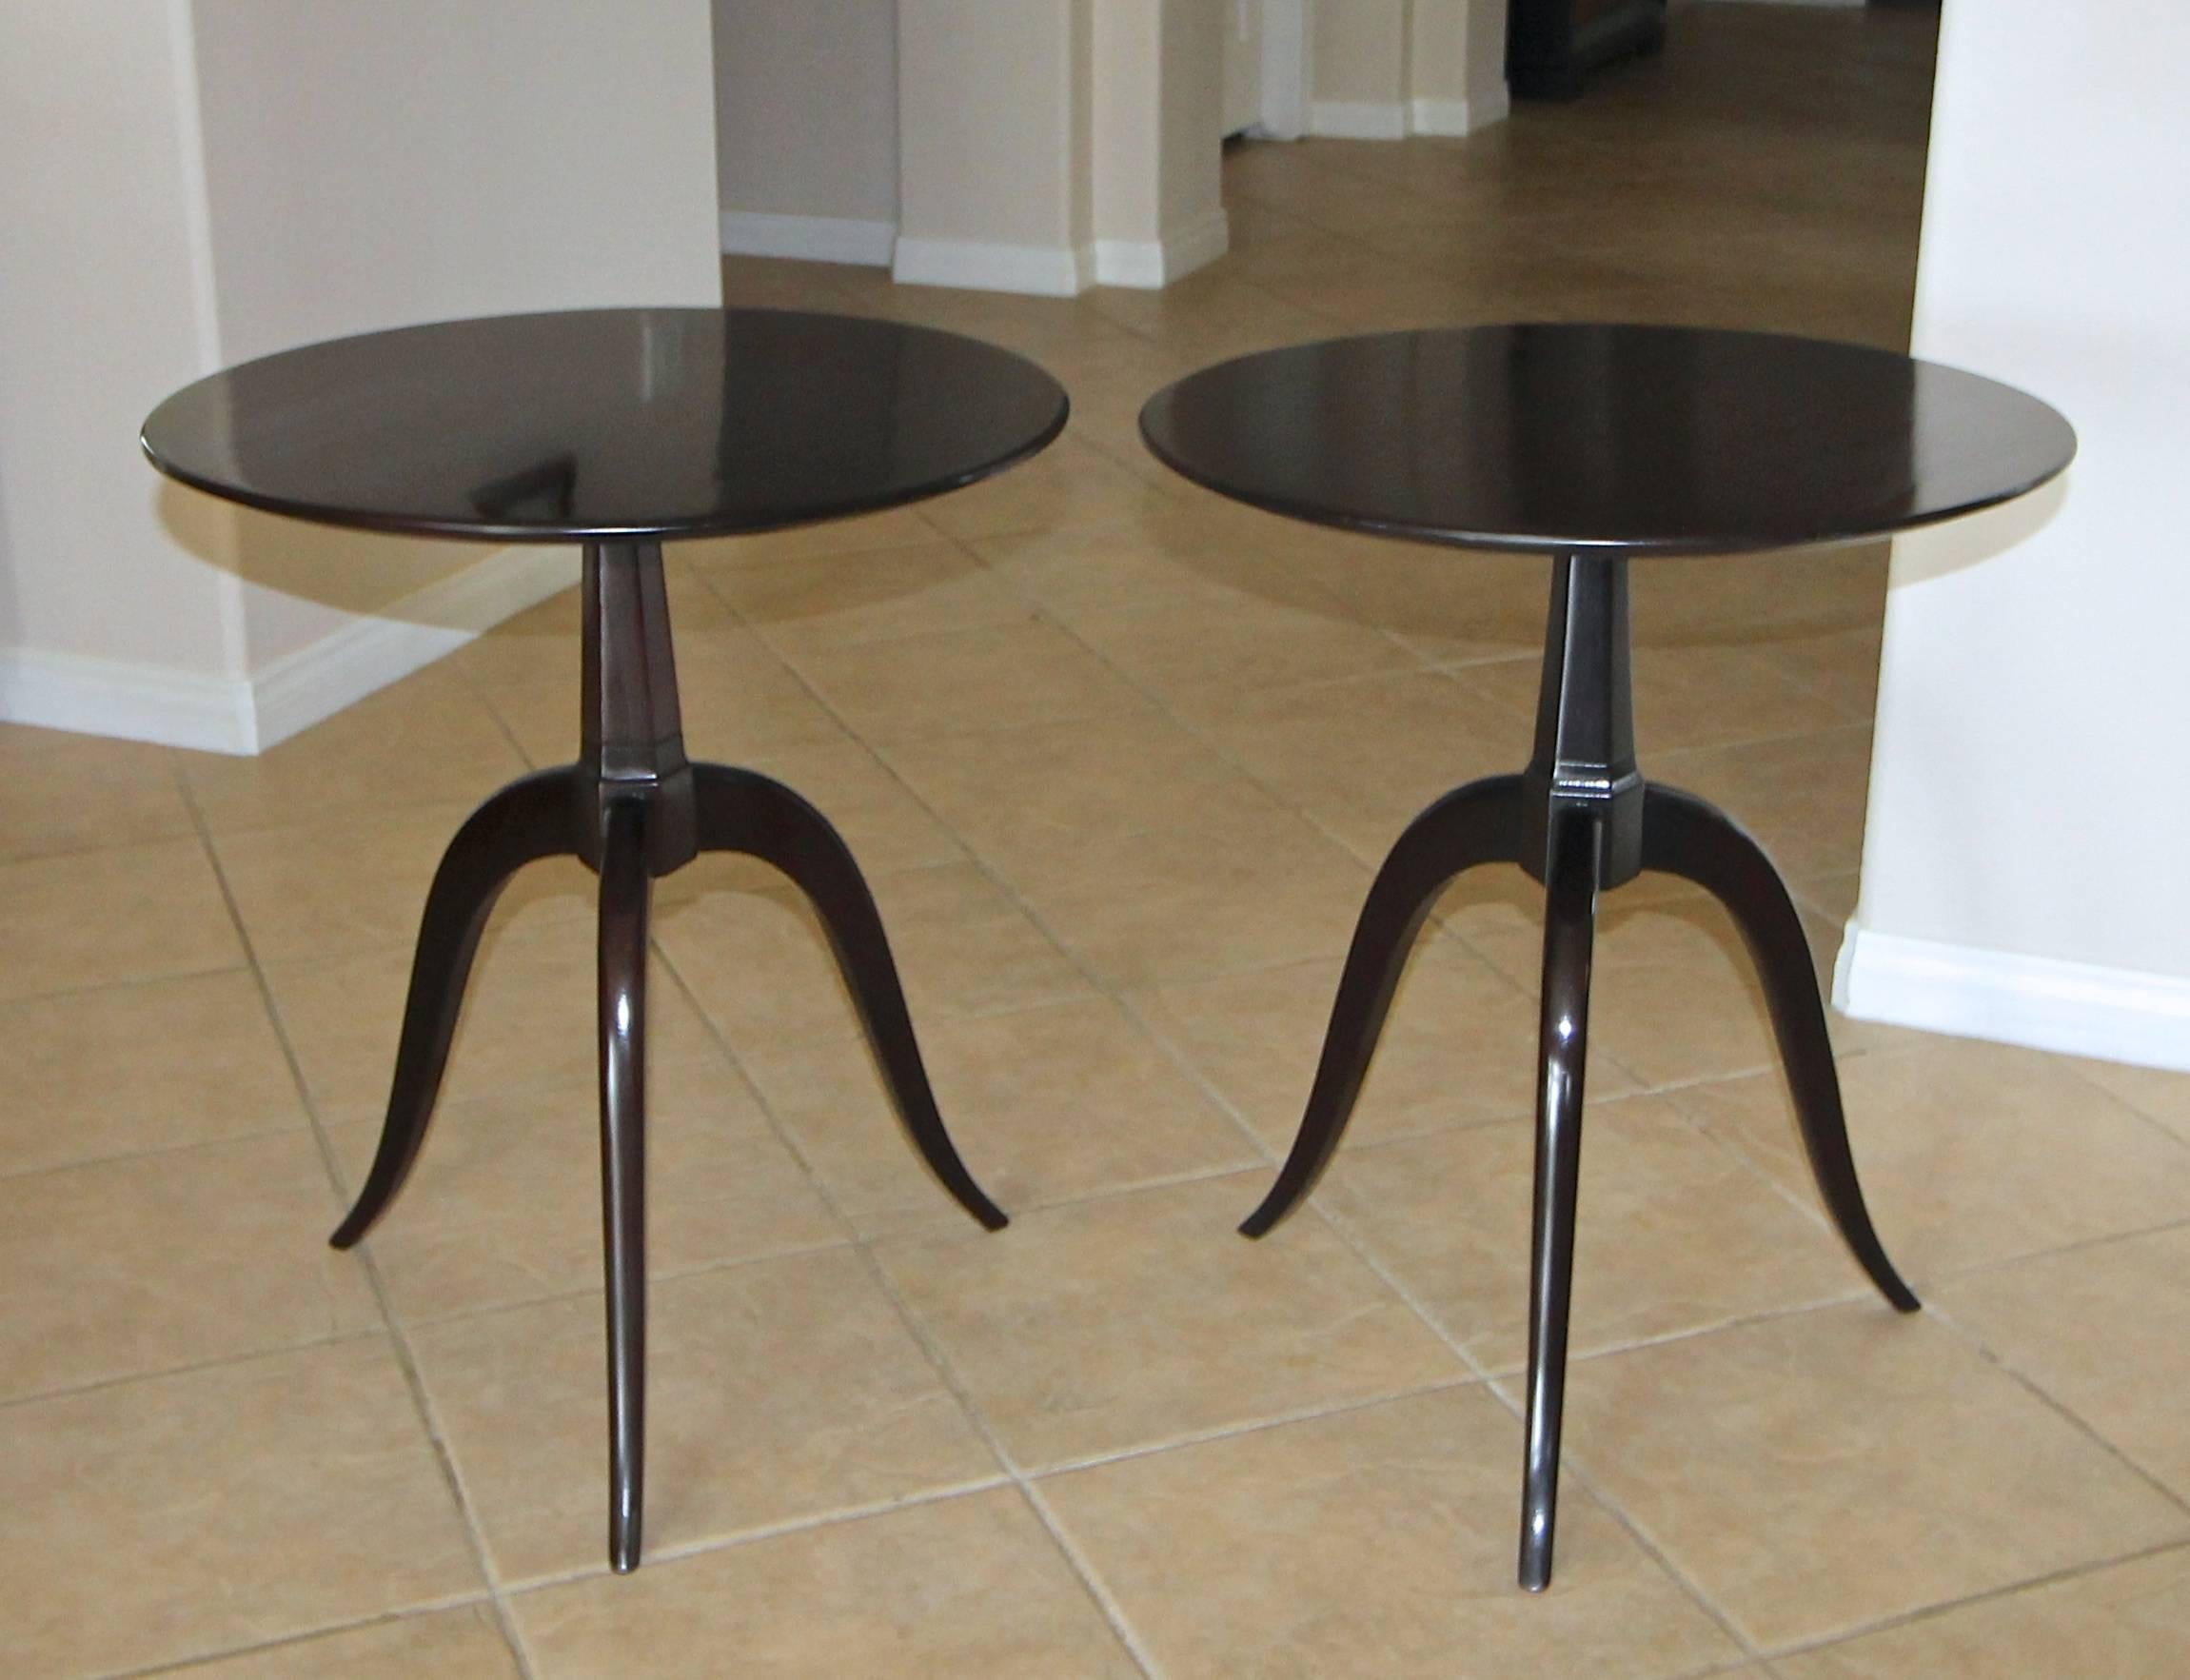 Pair of round top dark walnut/espresso finish wood side or end tables by Paul Frank for Brown Saltman. Solid wood construction tables resting on gently curved tripod legs. More recently restored.